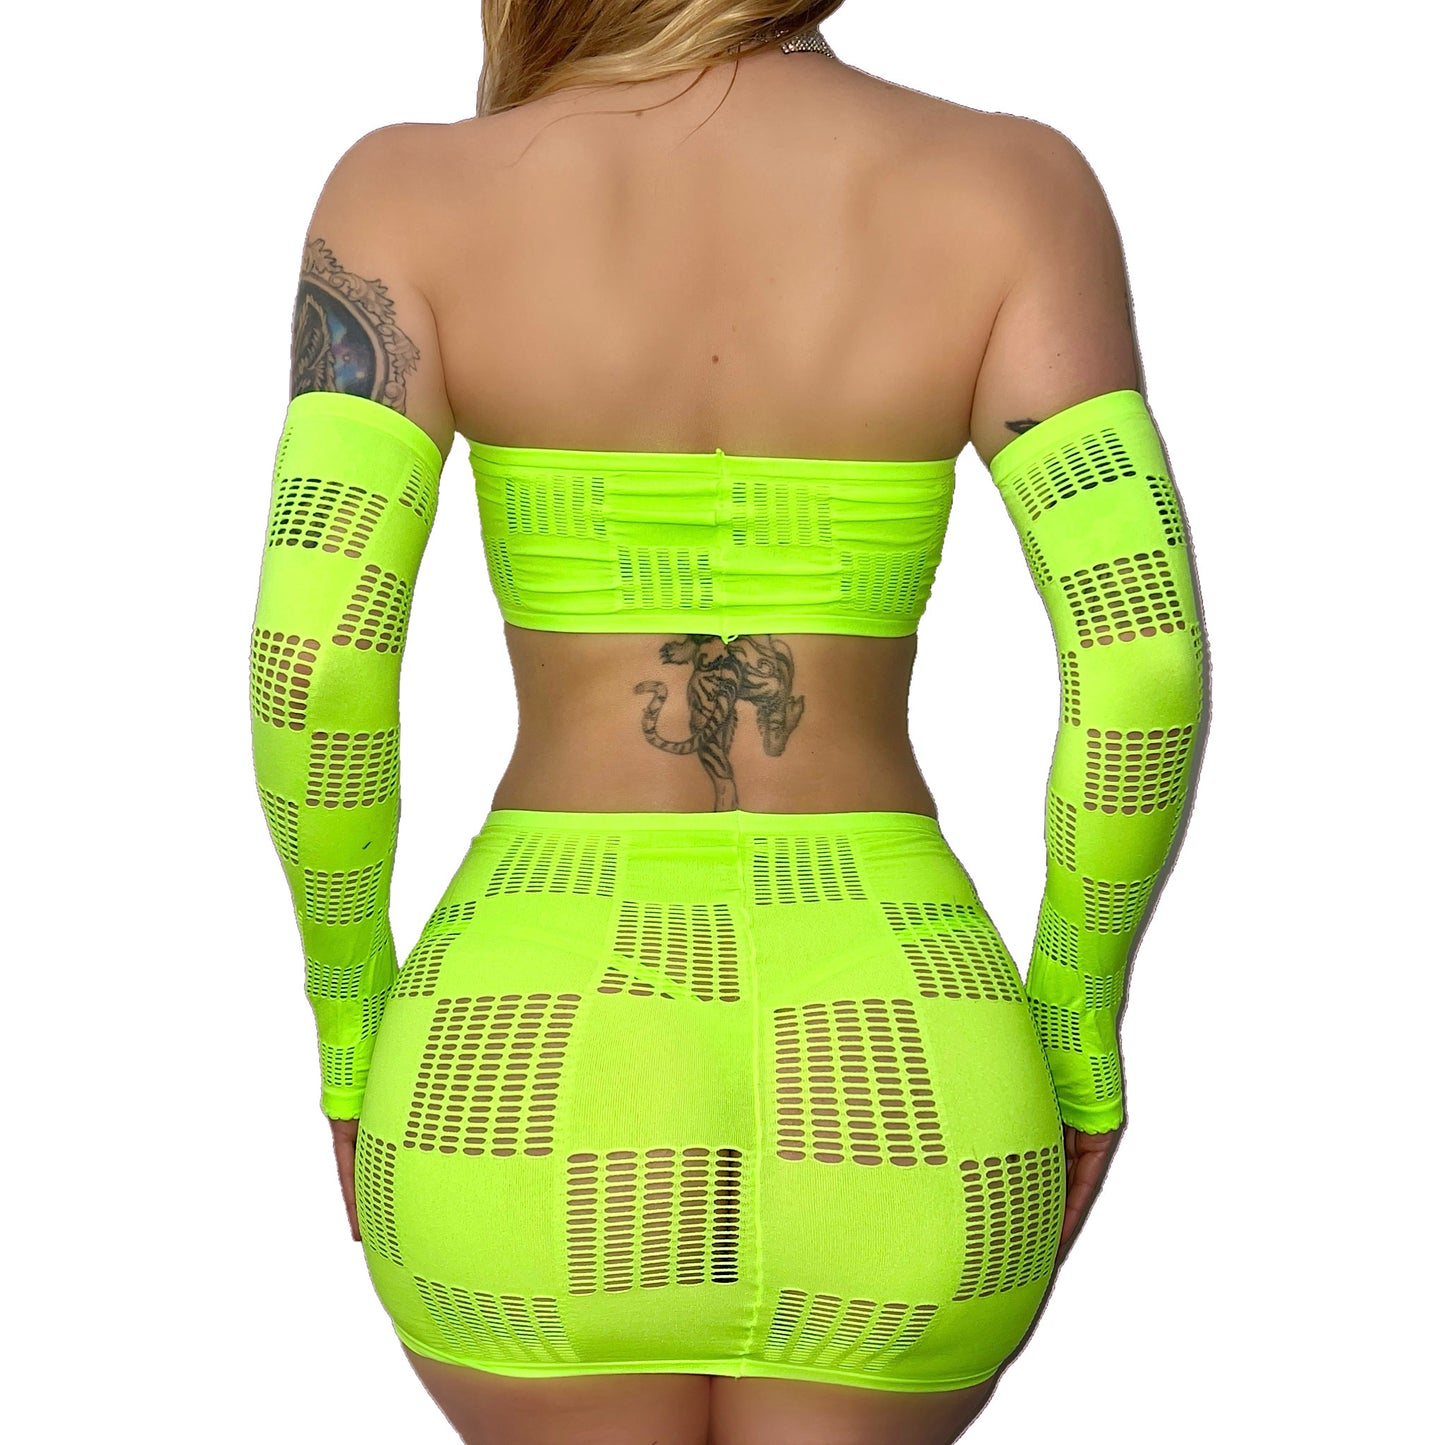 Here Comes Trouble Skirt Set: Neon Green